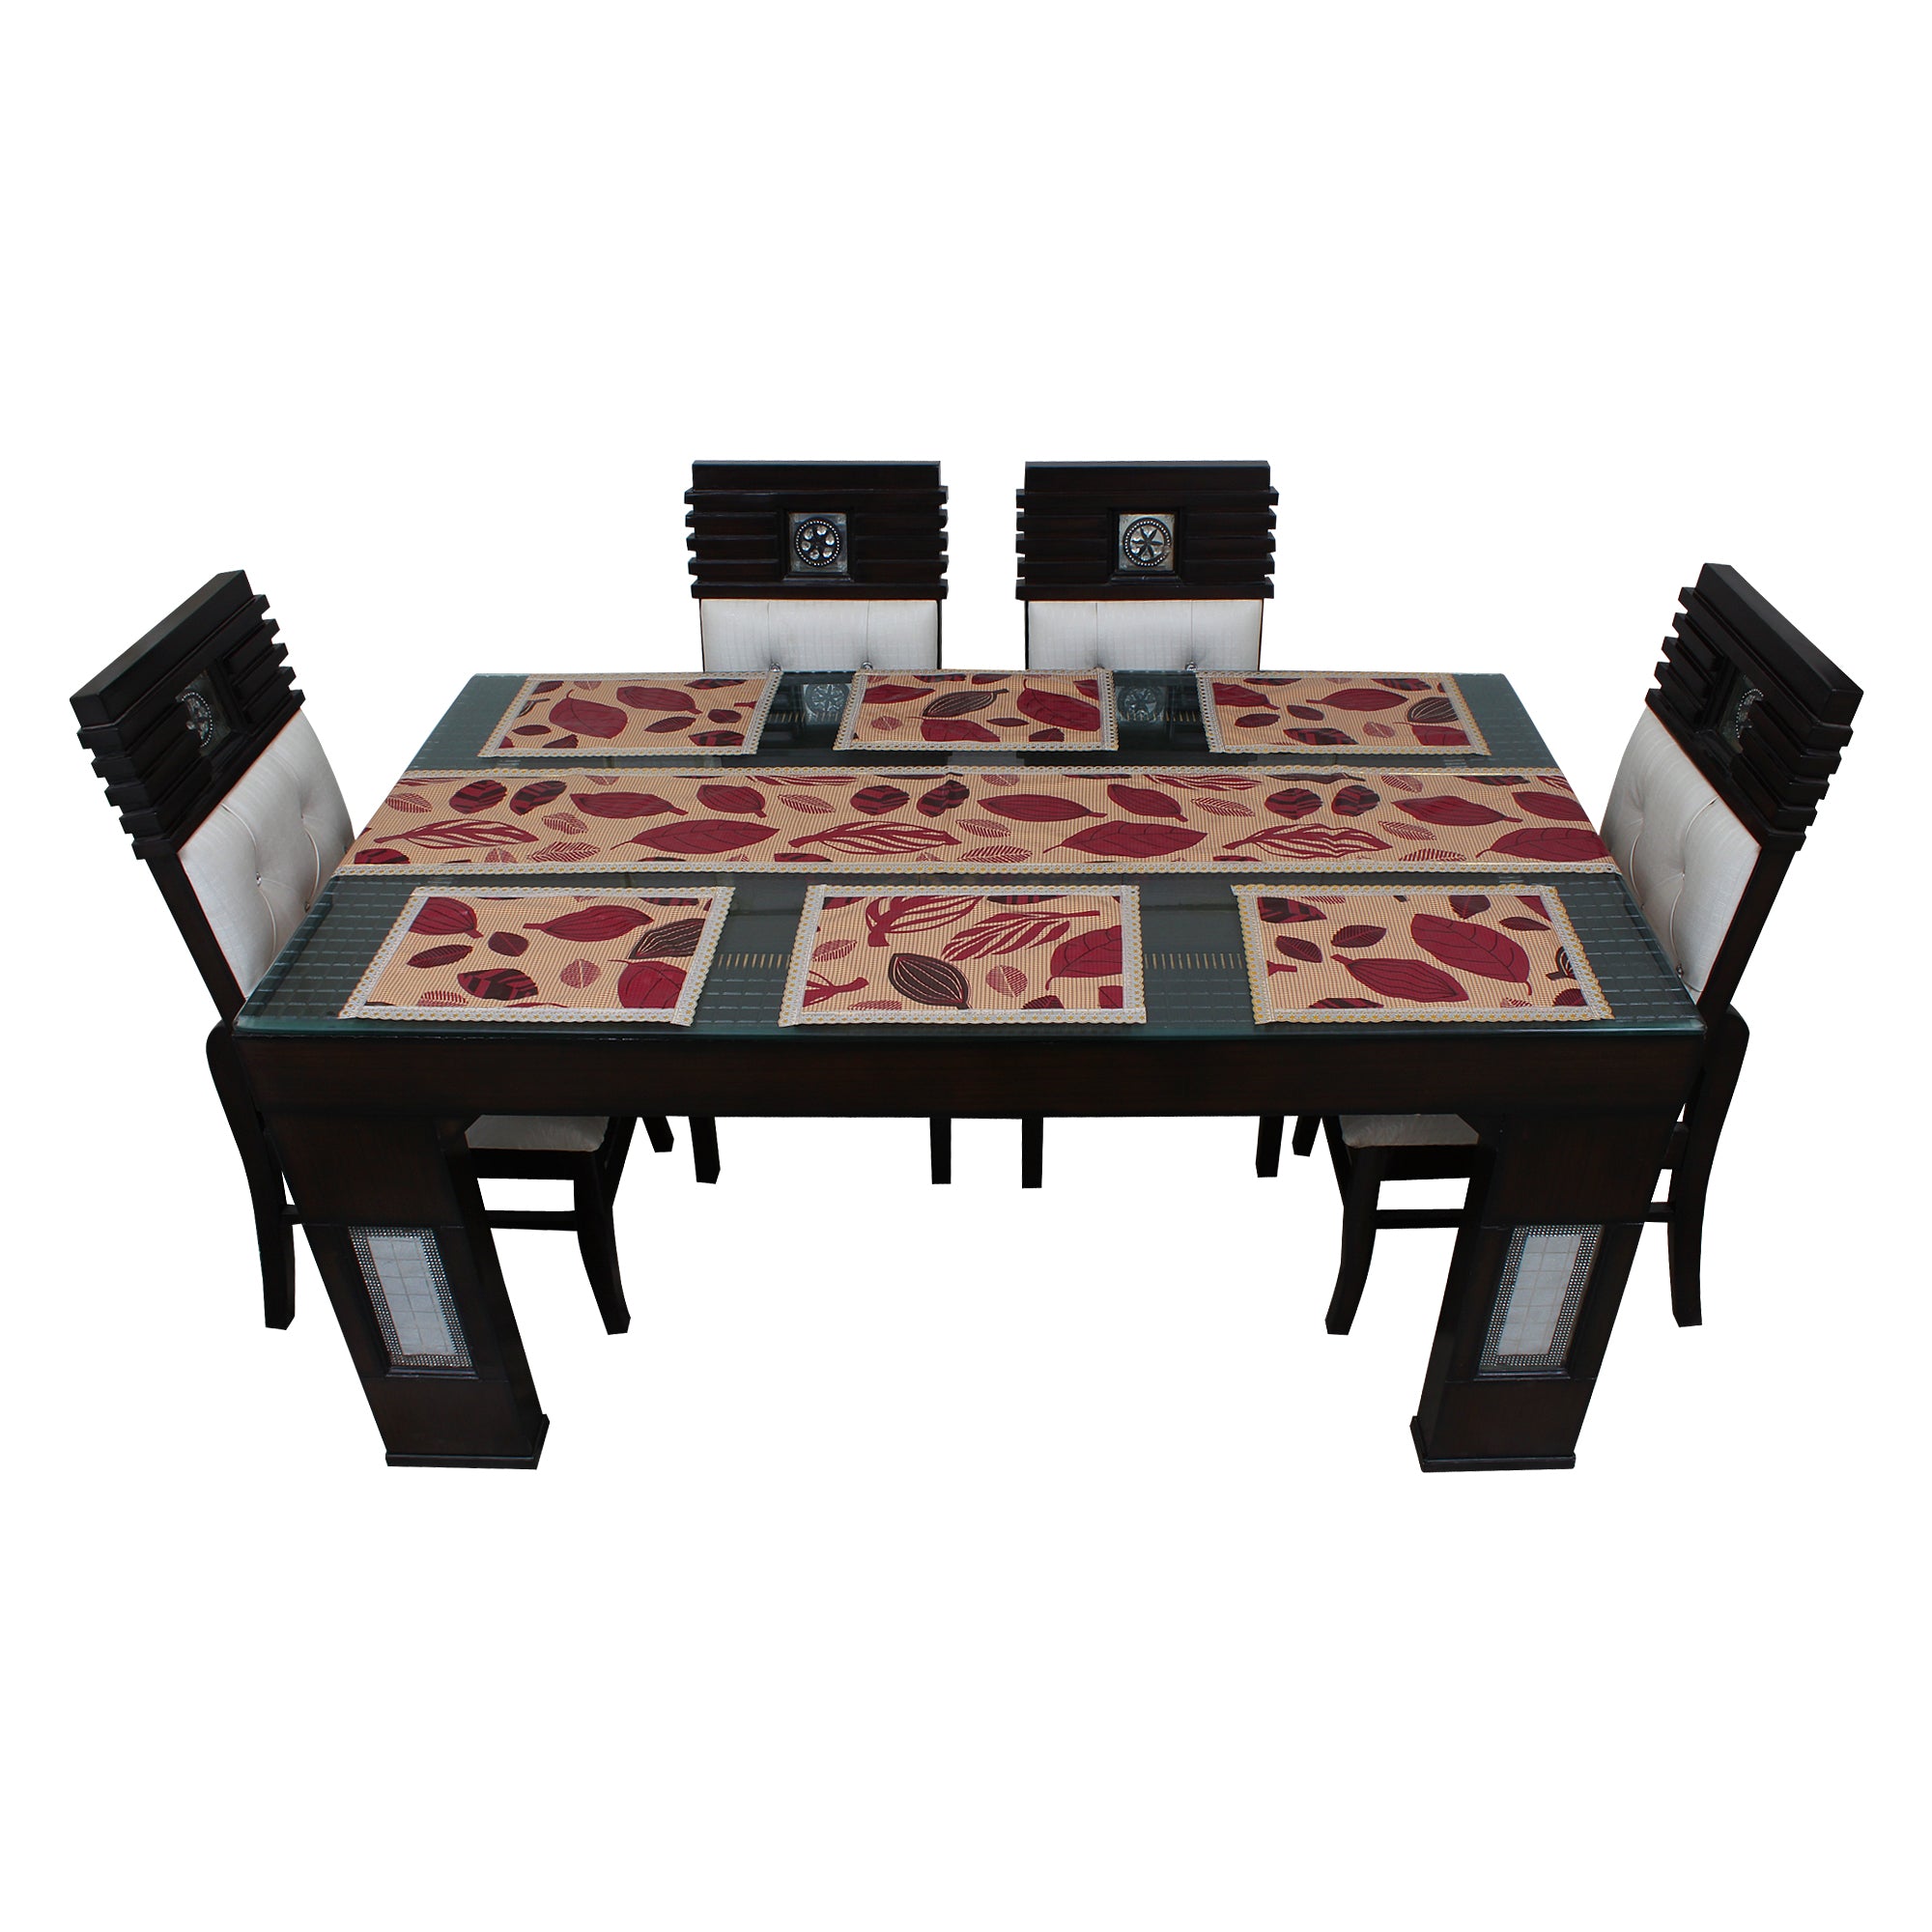 Waterproof & Dustproof Dining Table Runner With 6 Placemats, SA19 - Dream Care Furnishings Private Limited